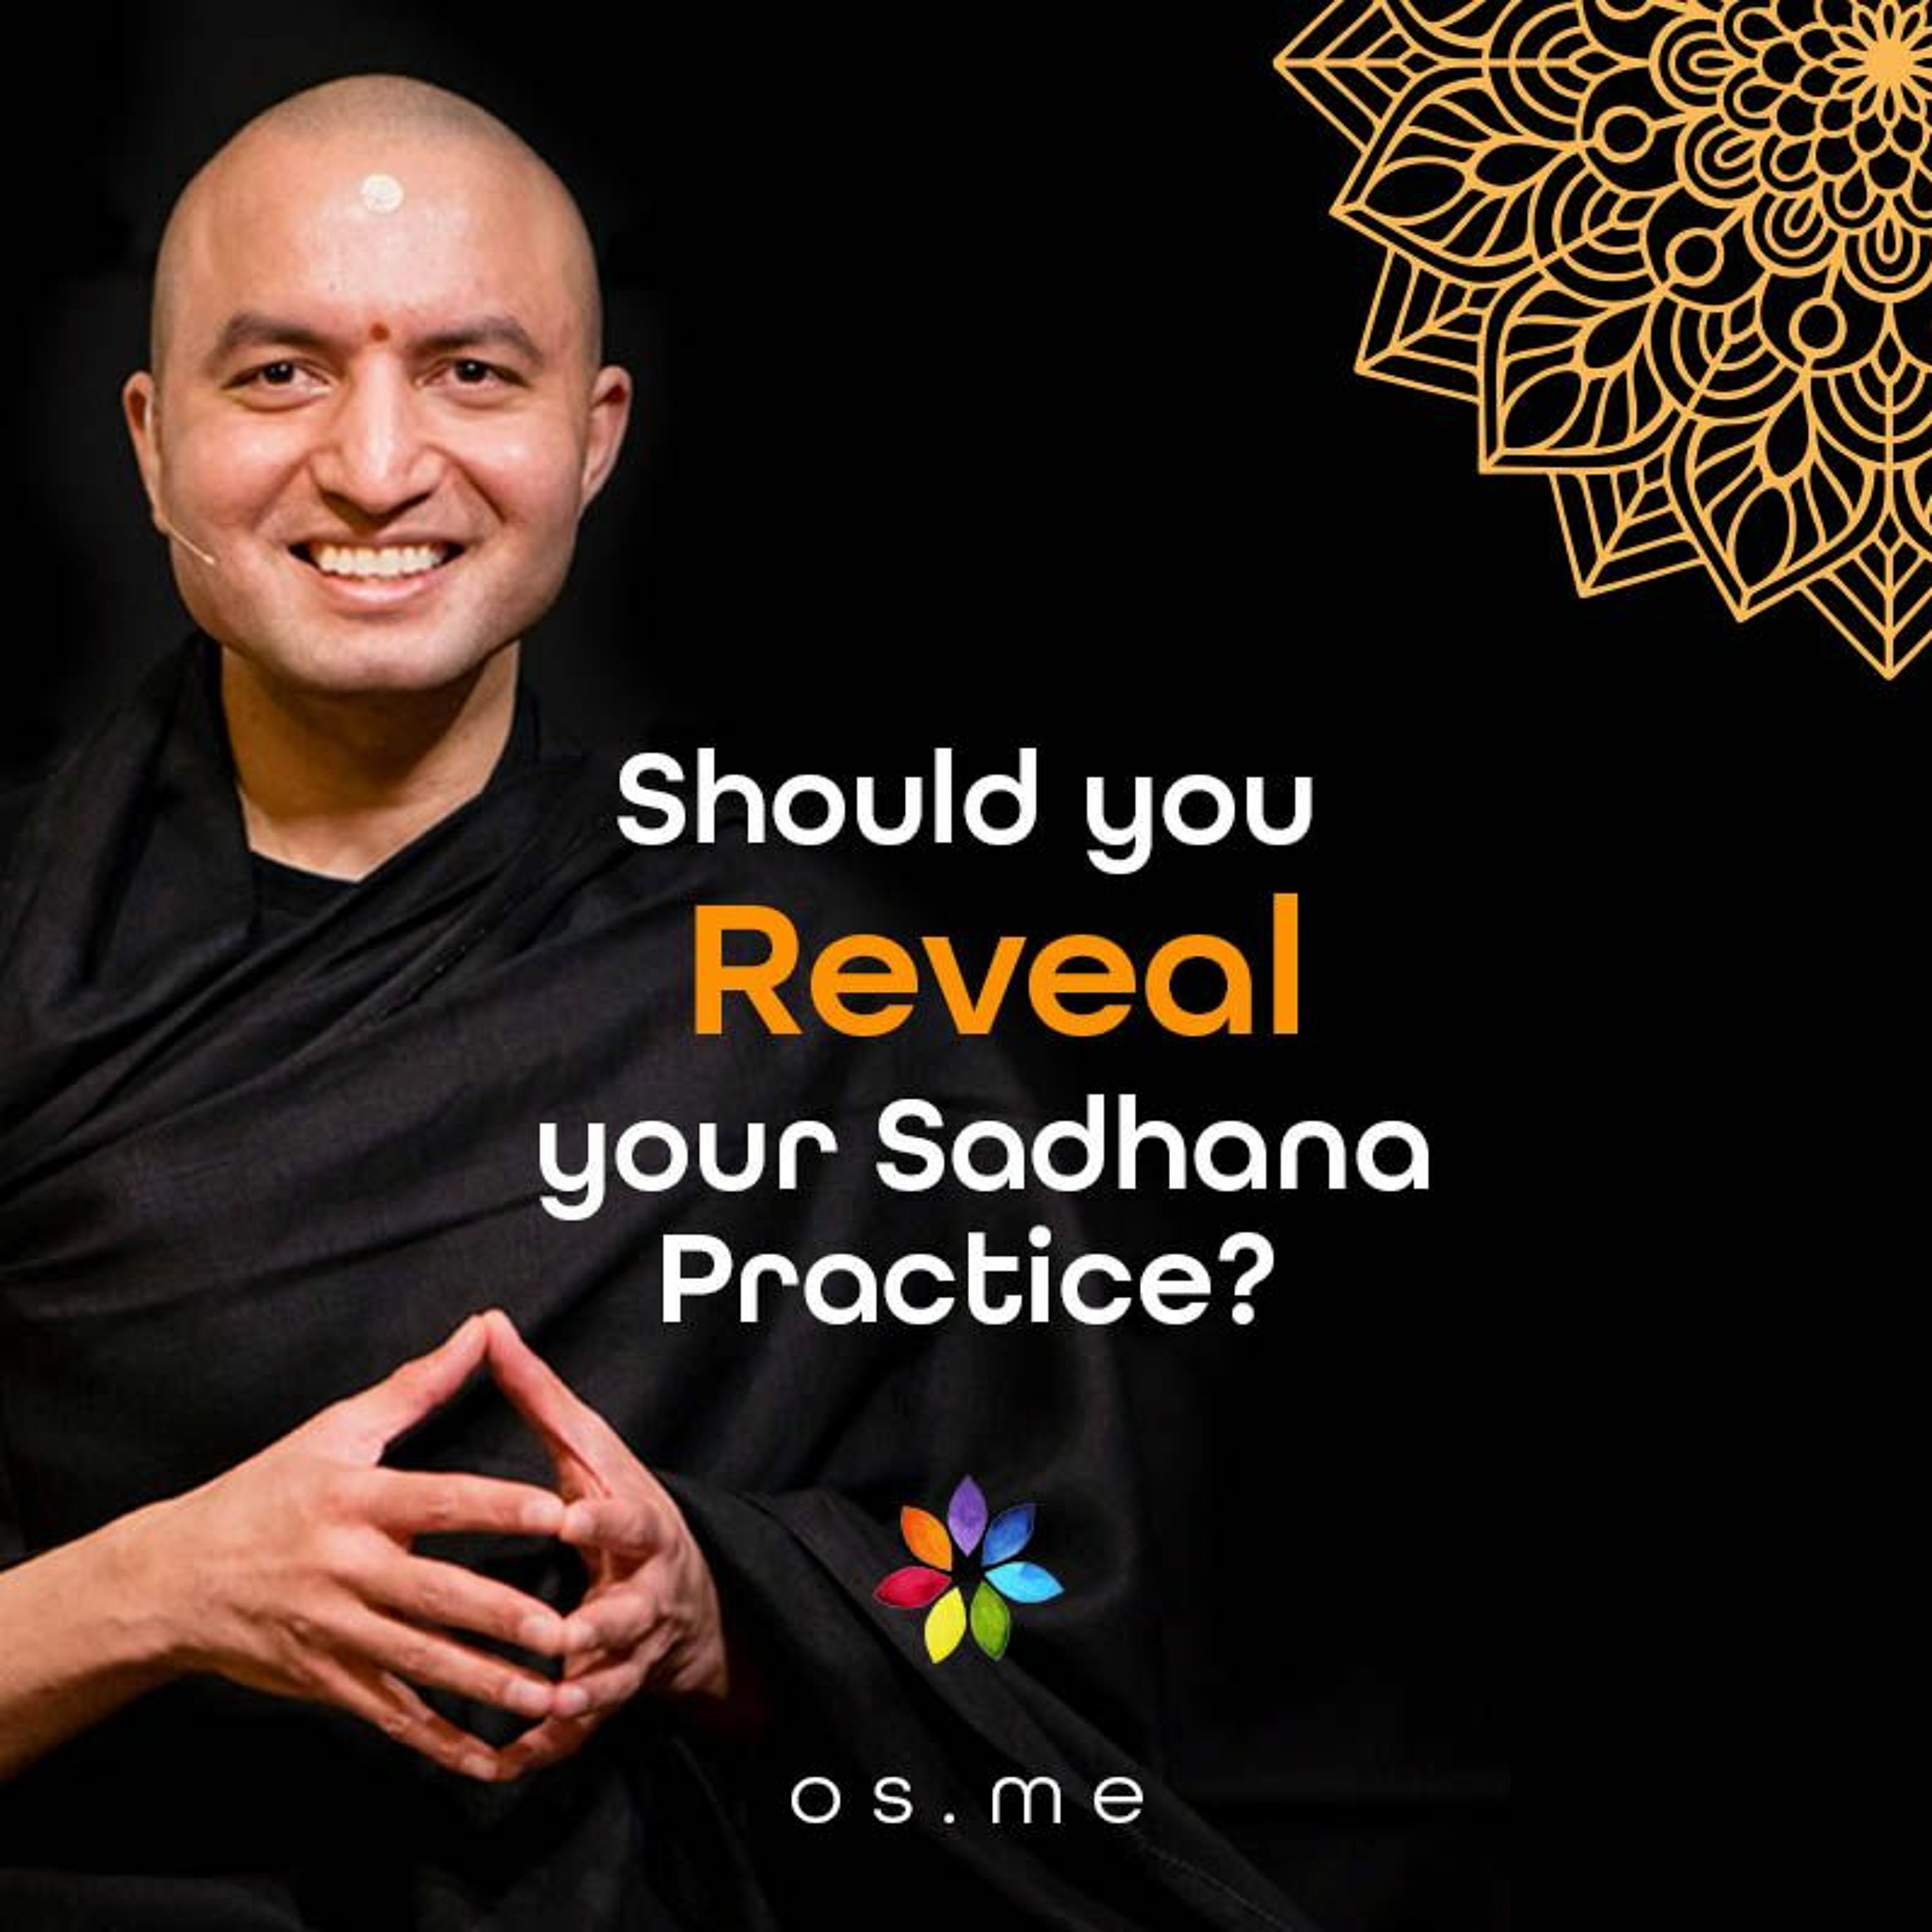 Should You Reveal Your Sadhana Practice